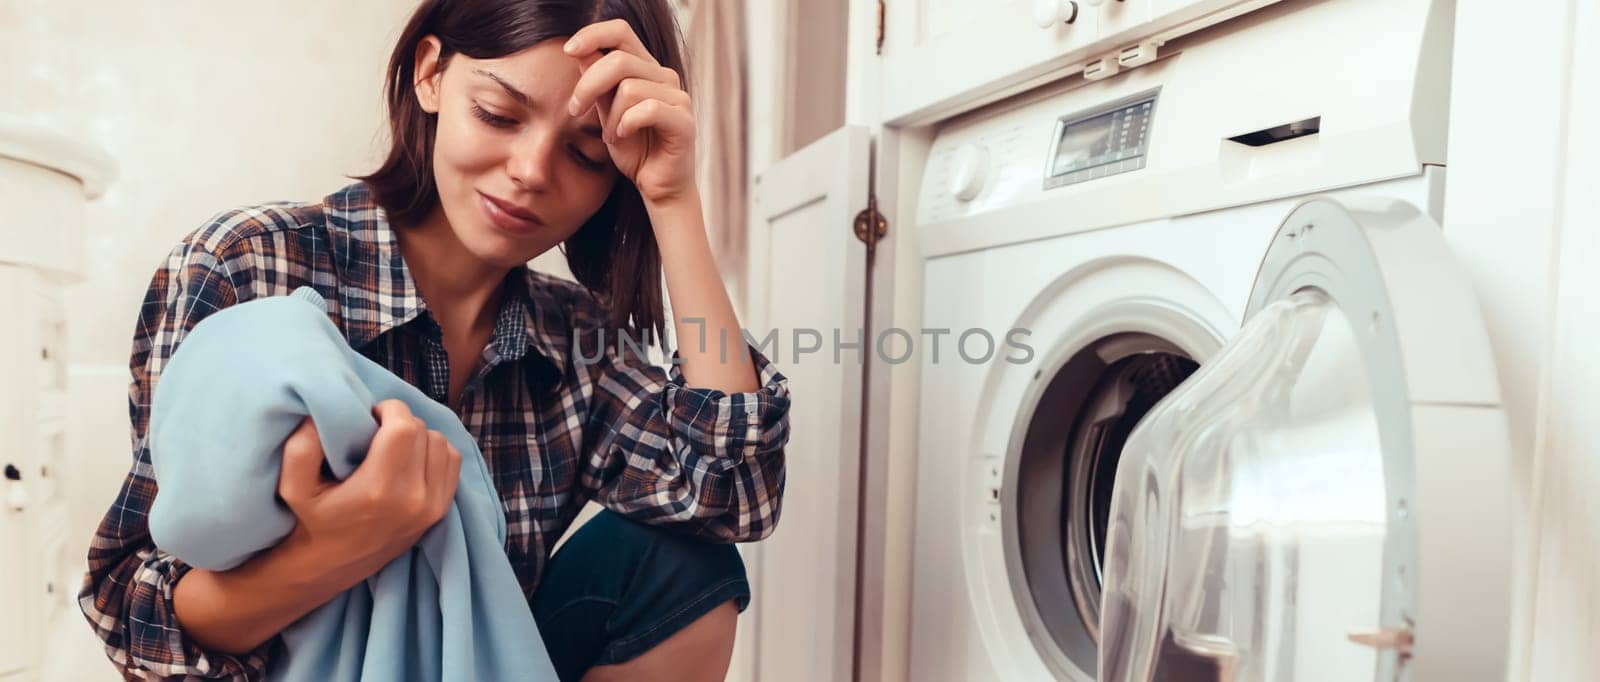 Girl puts clothes in washing mashine. by africapink